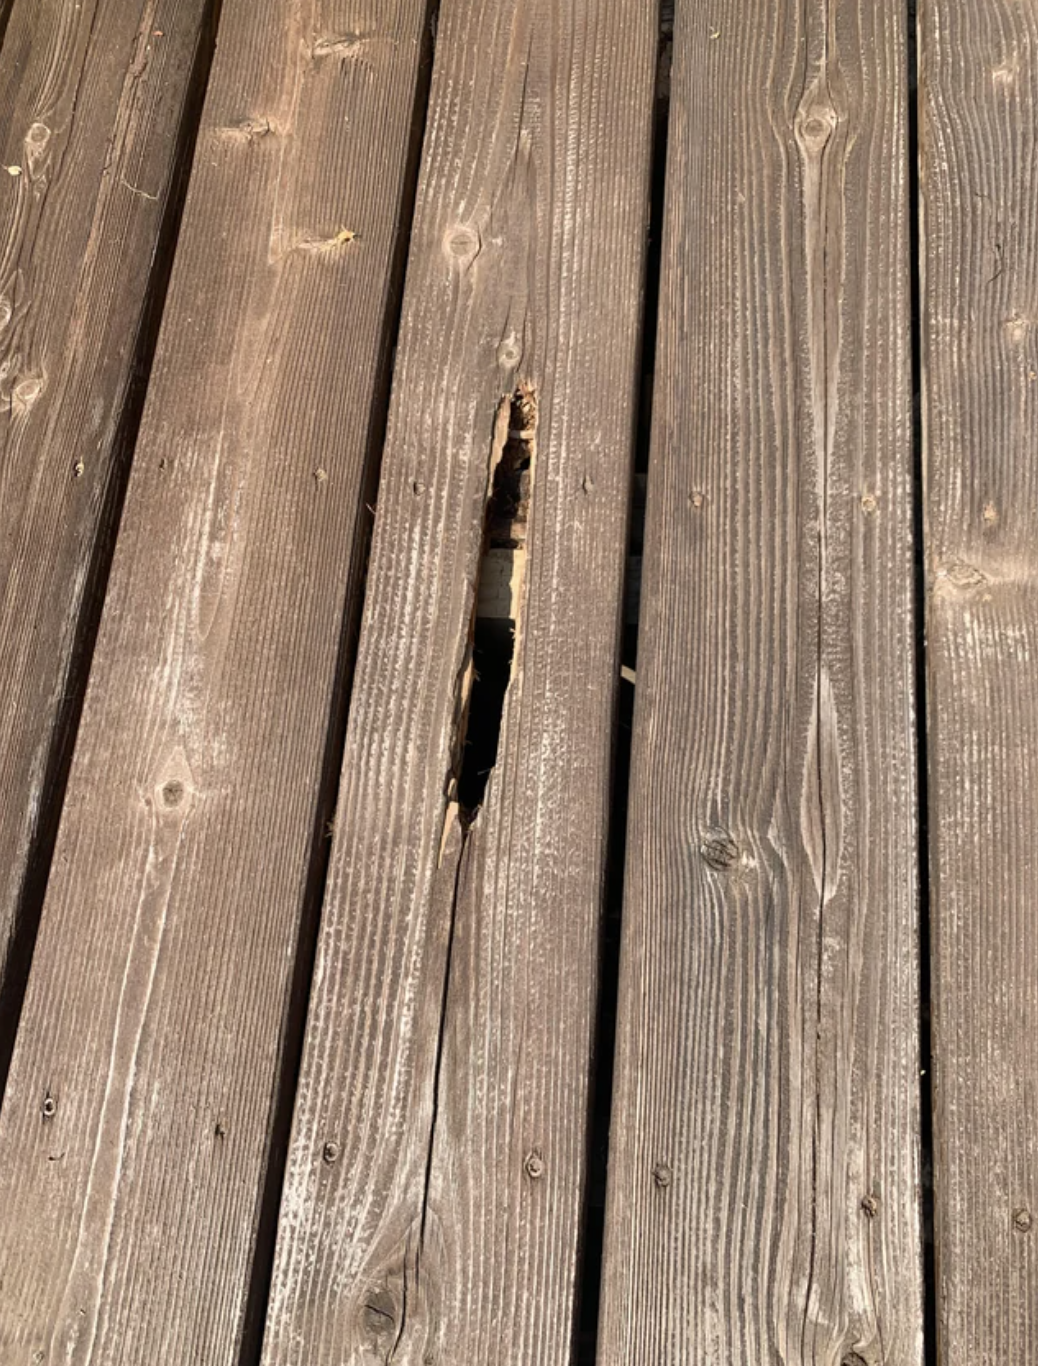 Damaged wooden deck with a prominent crack